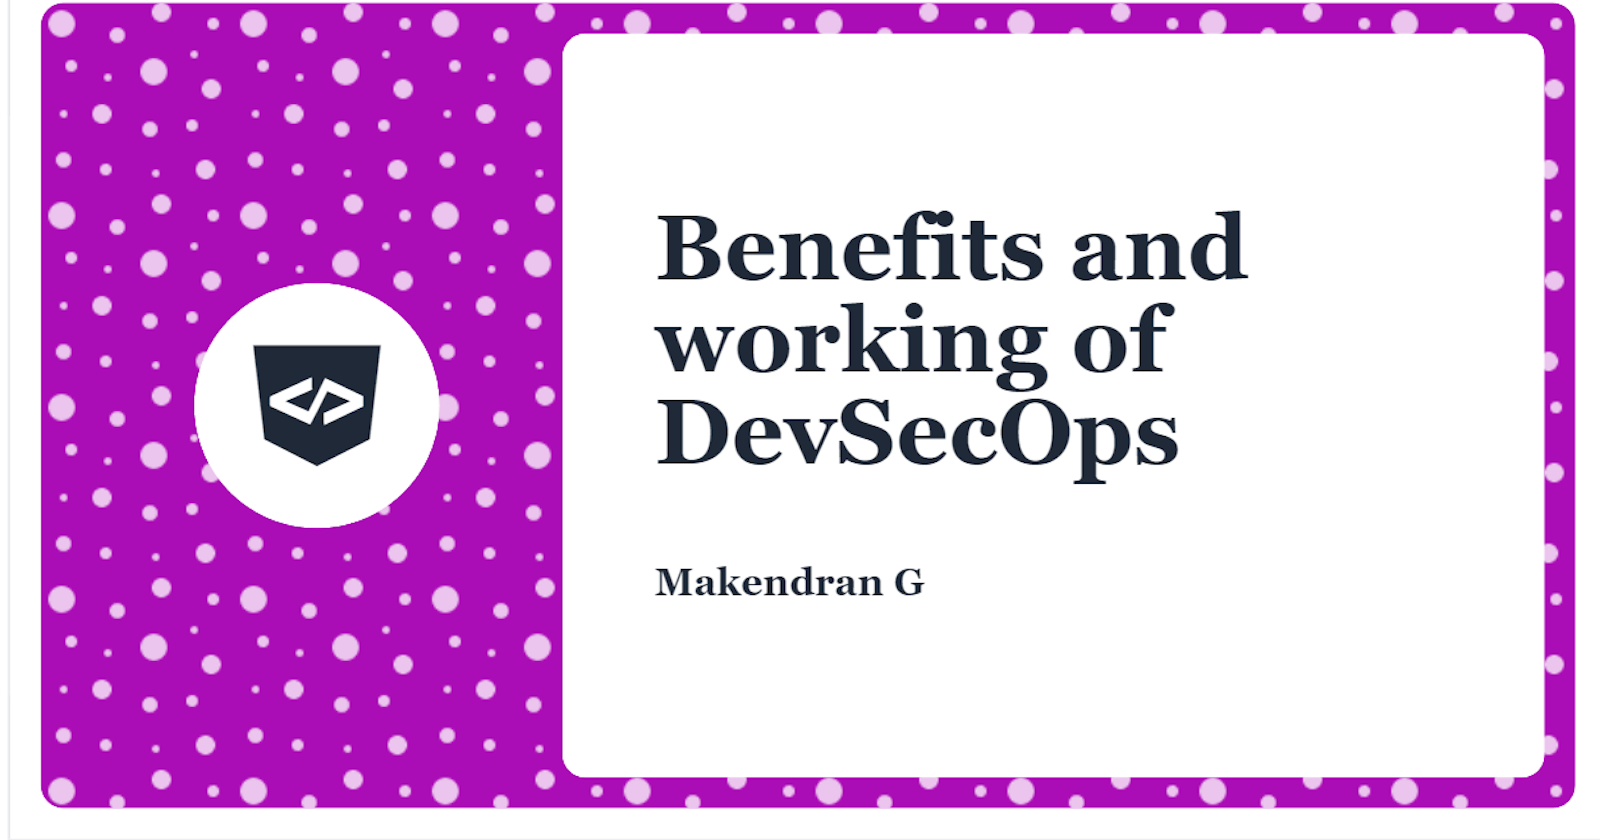 Benefits and working of DevSecOps